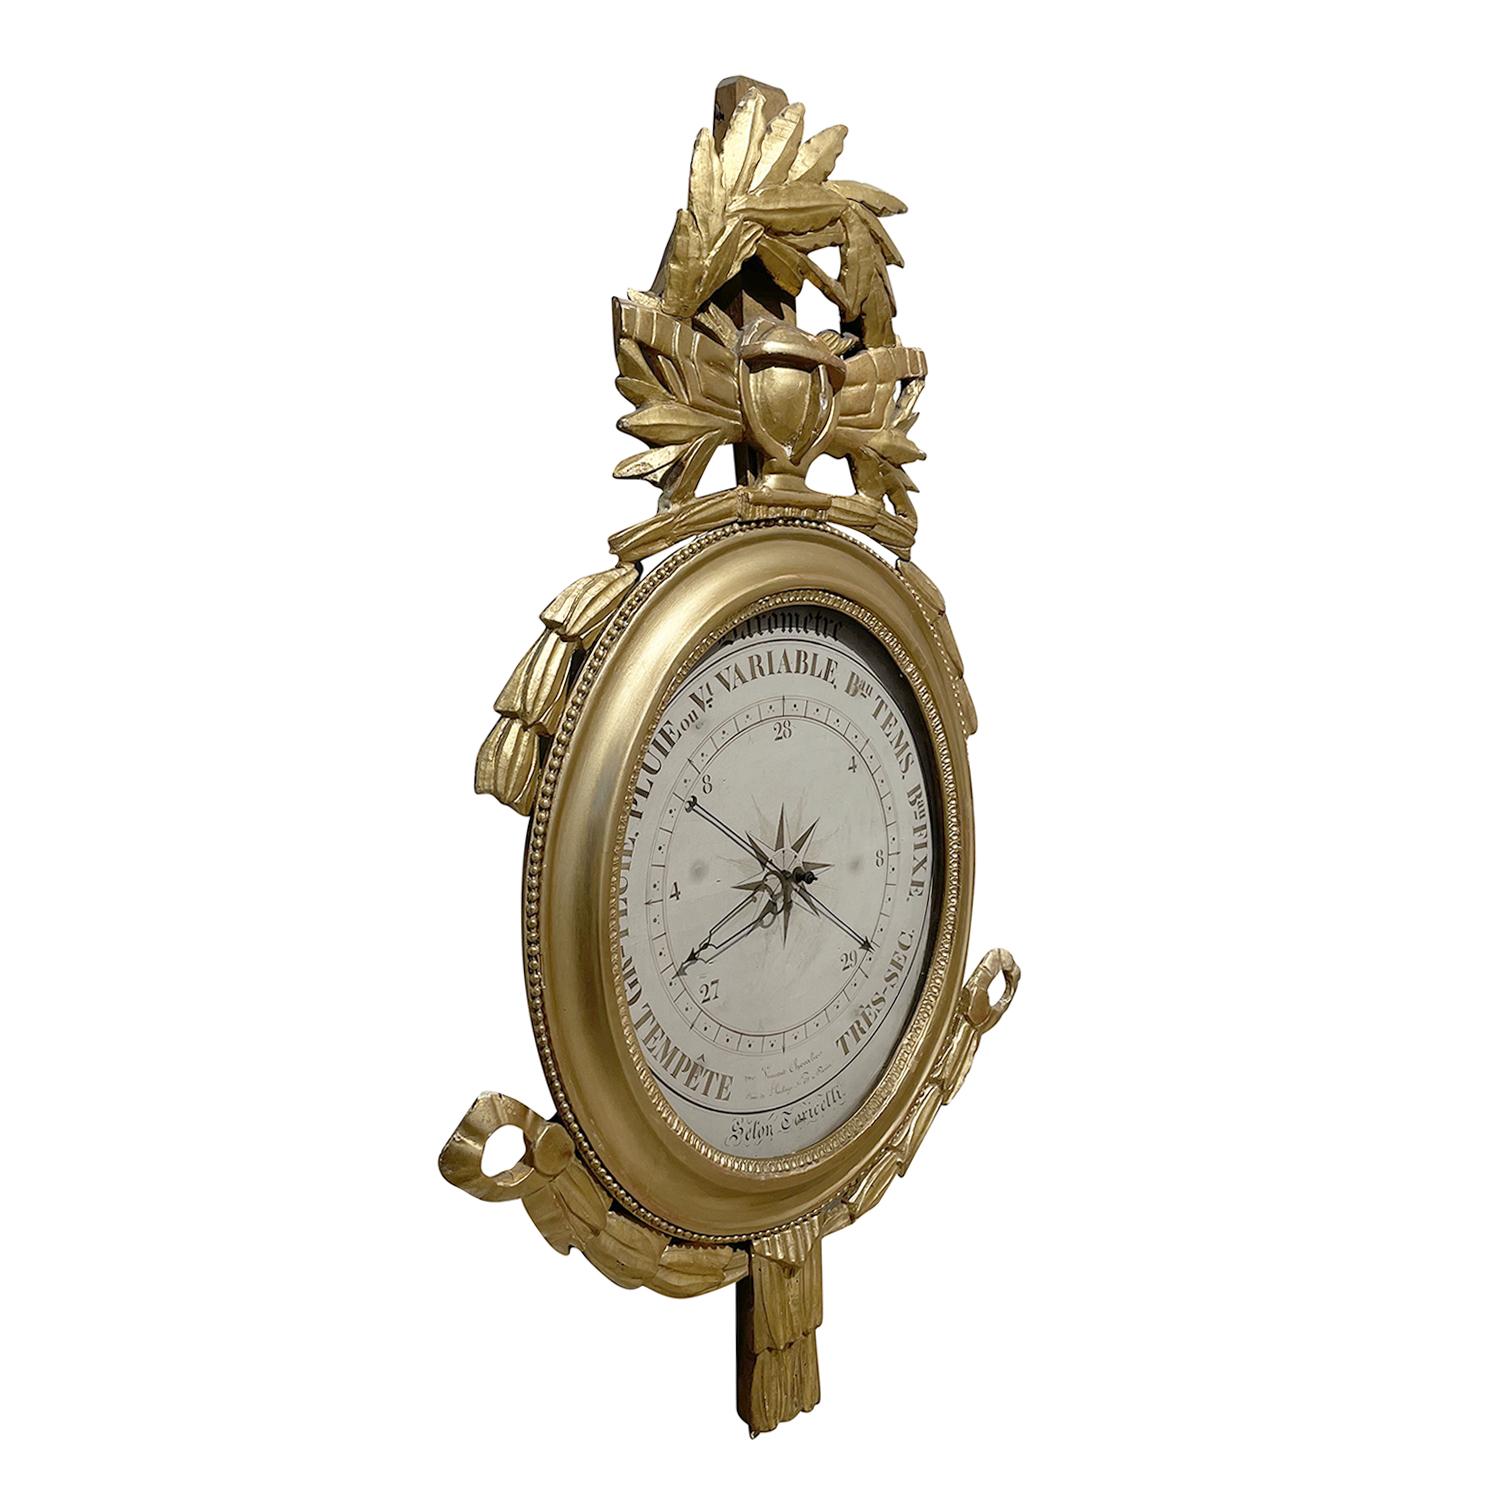 A gold, large antique French Louis XVI period barometer, signed by Torricelli in gilded wood and of oval shape with original scientific illustrations, in good condition. The detailed wall décor piece is consisting its original glass. Framed with